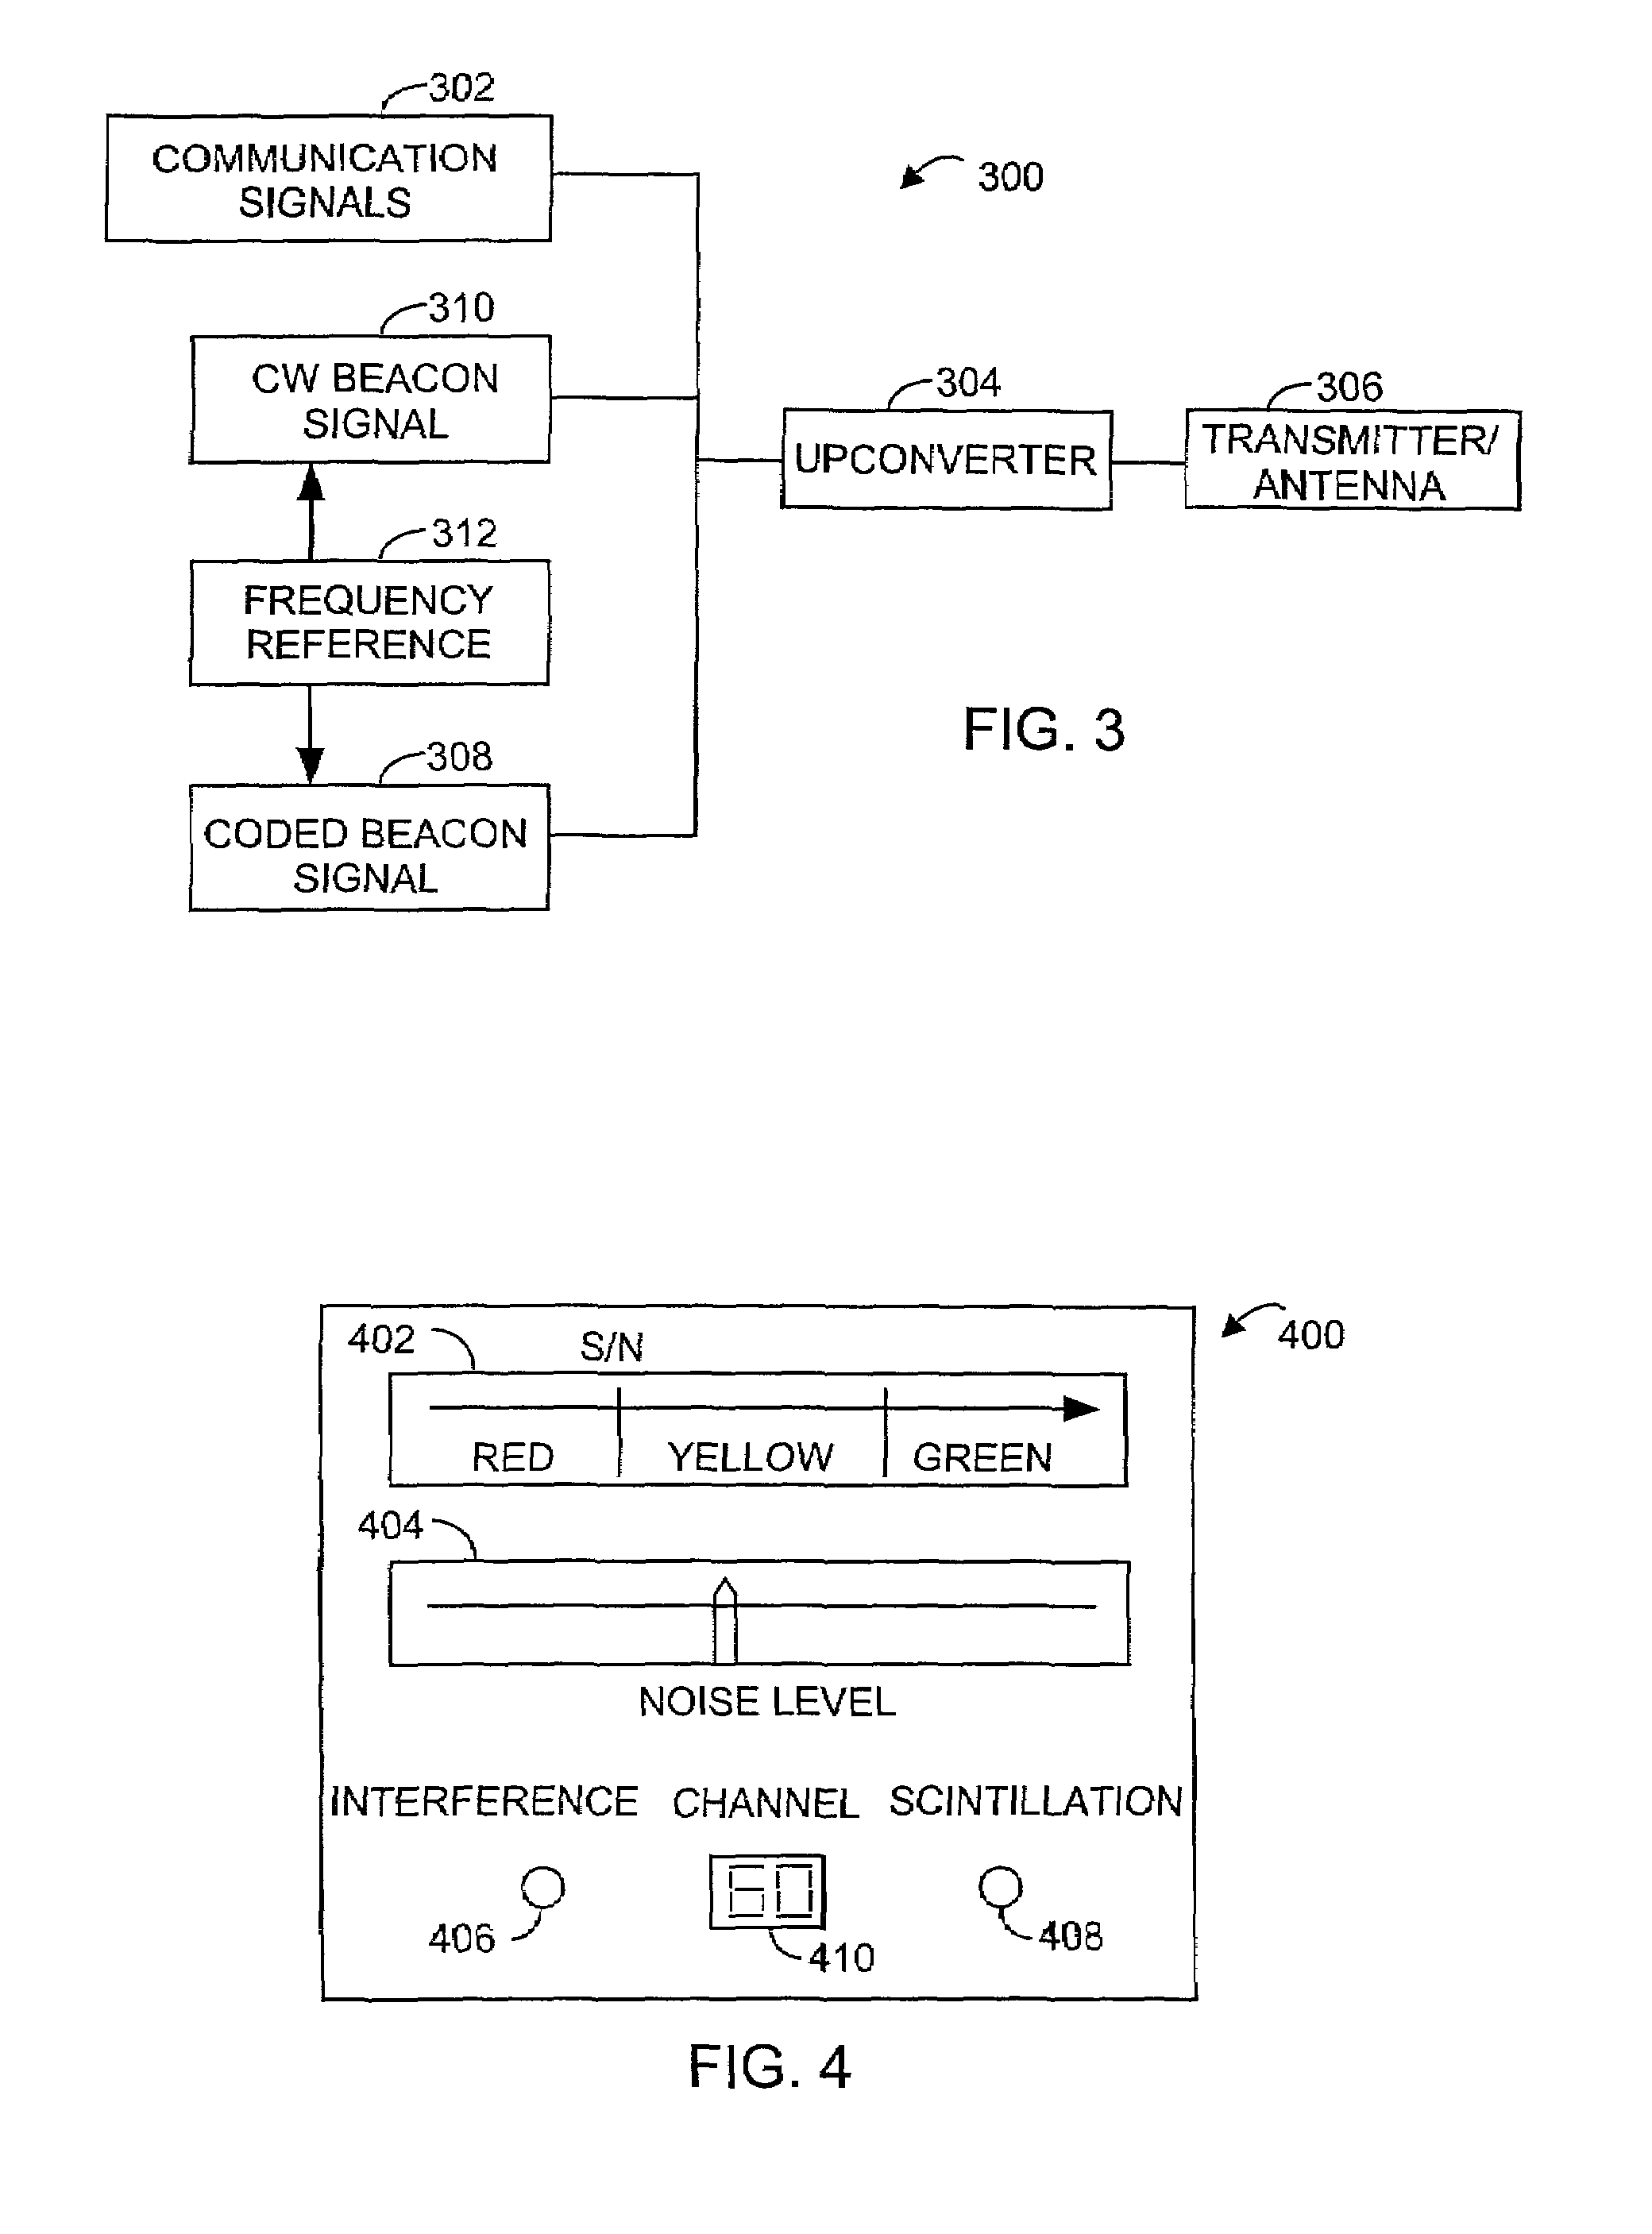 Method of determining communication link quality employing beacon signals